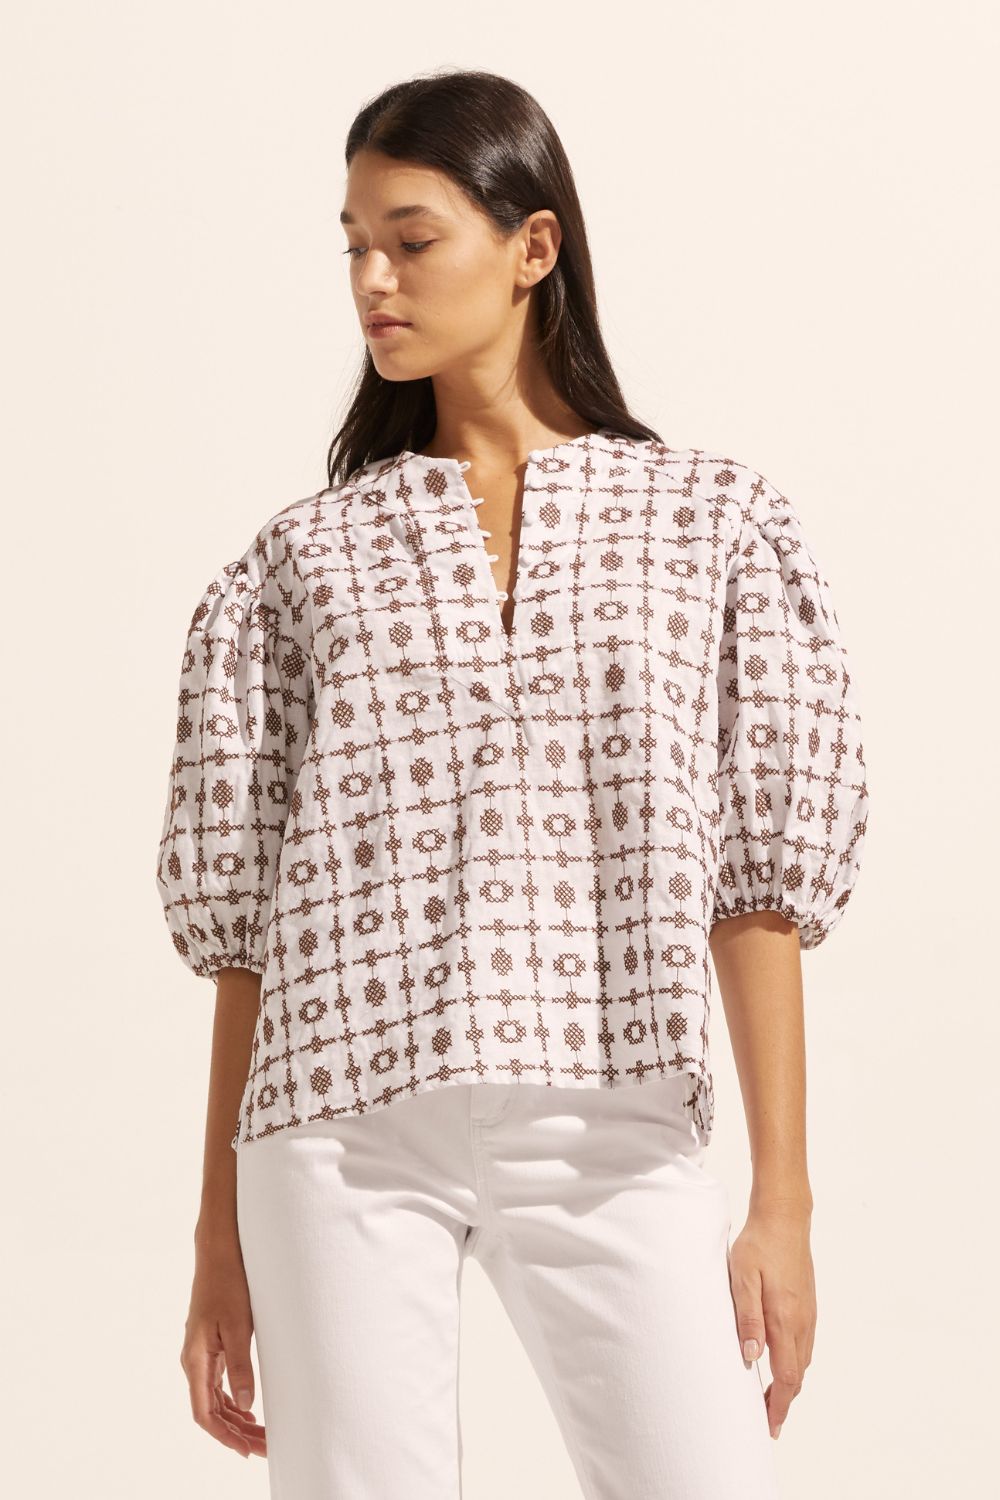 brown and white, top, mid length sleeve, button down neckline, embroidered, front image